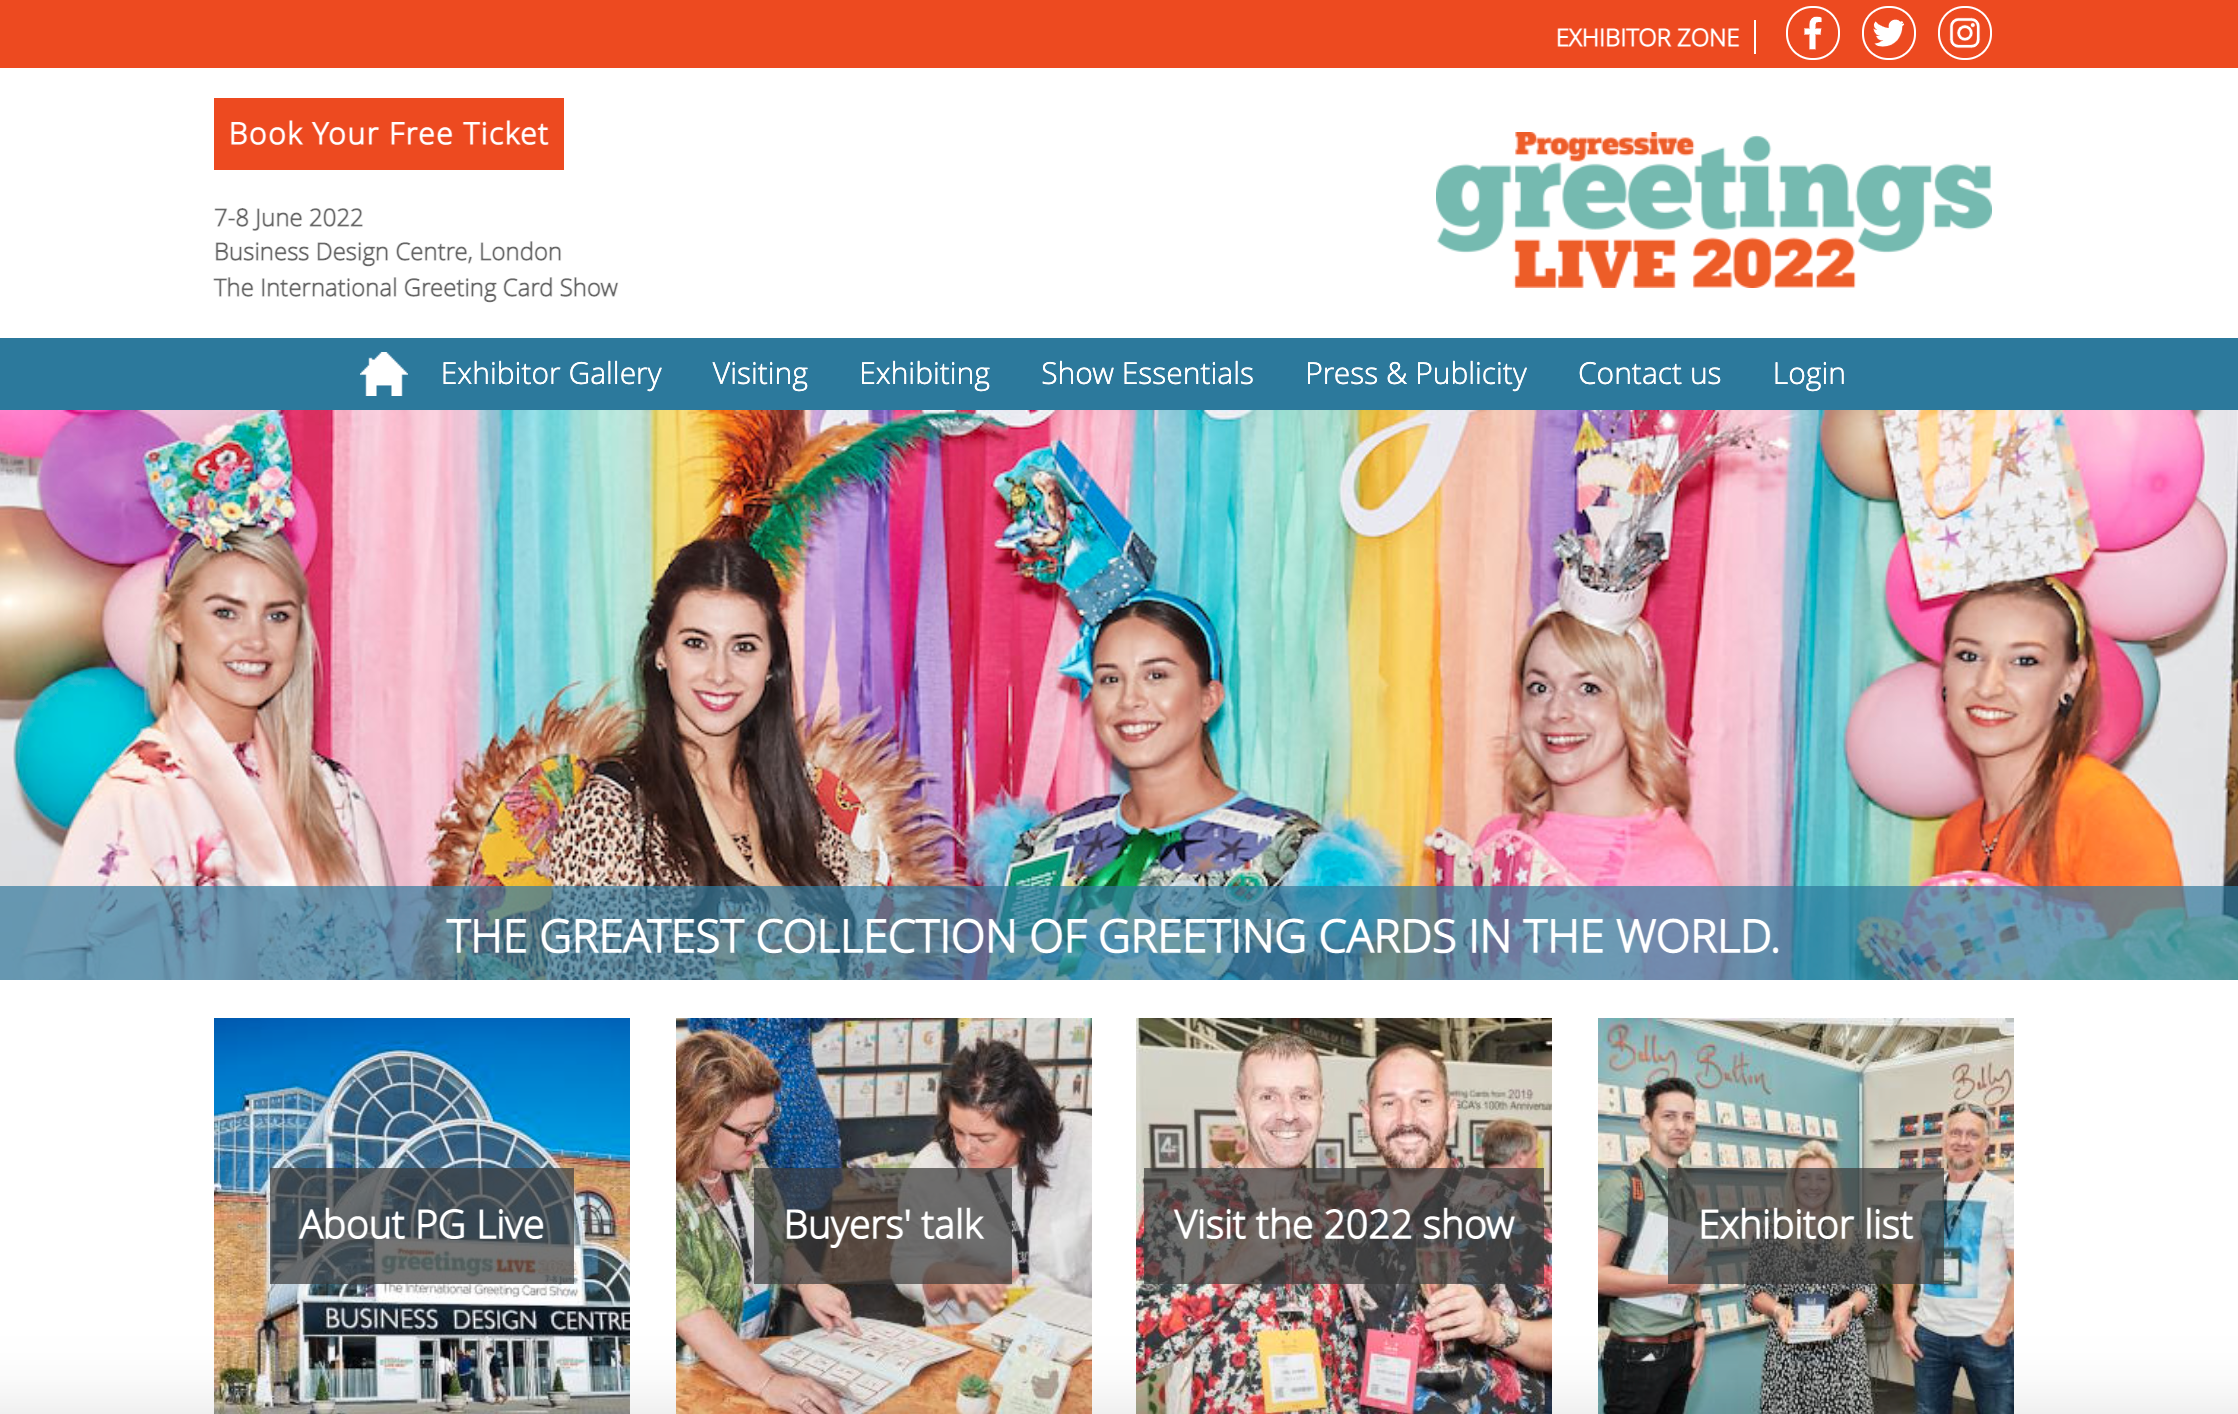 Above: The PG Live 2022 website contains the wherewithal to register for tickets as well as details of the already confirmed exhibitors with lots more in the pipeline.